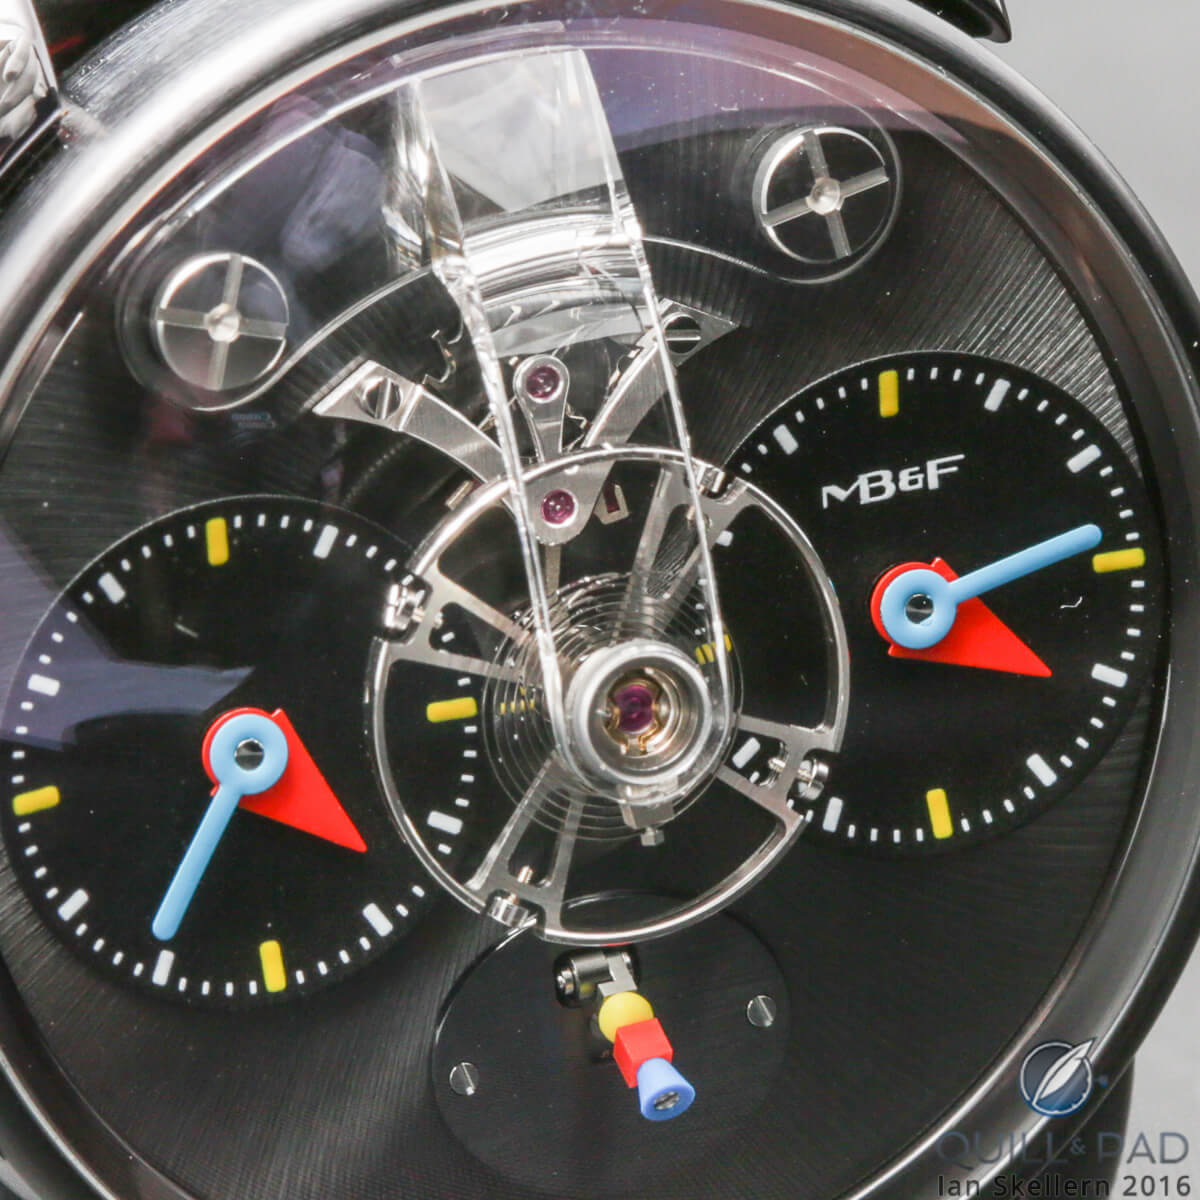 A close look at the dial side of the MB&F LM1 Silberstein in blackened titanium